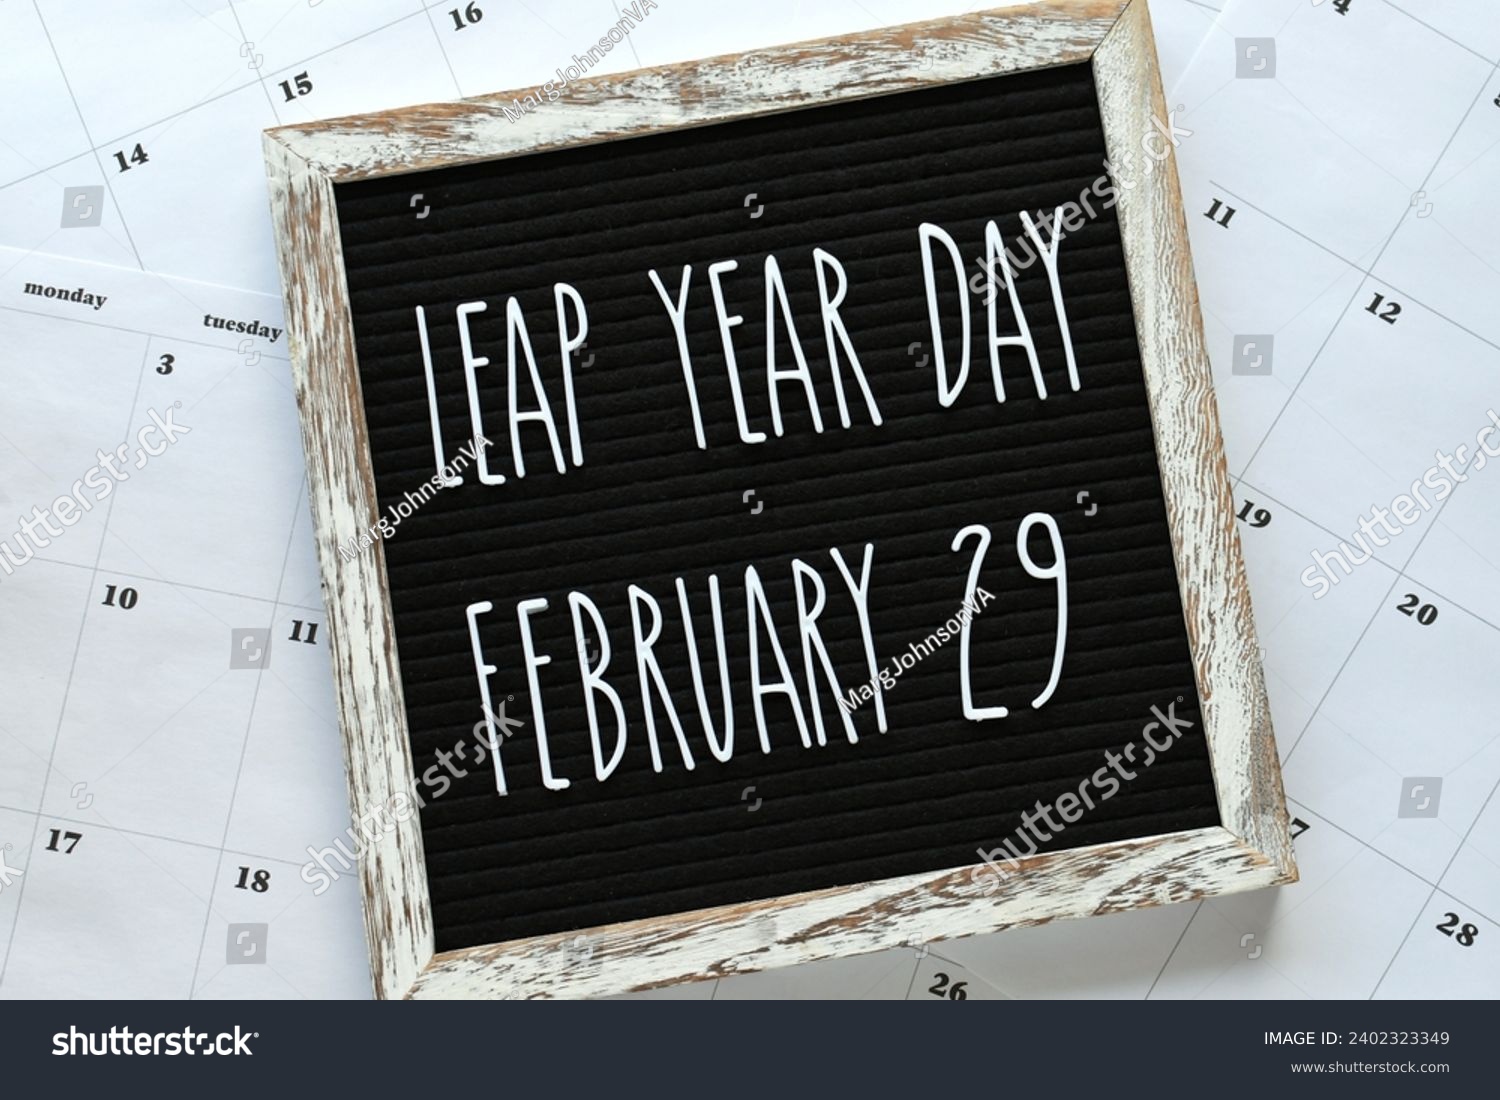 Leap Year Day, February 29, message board flat lay on calendar pages - concept for event that happens every four years.  #2402323349